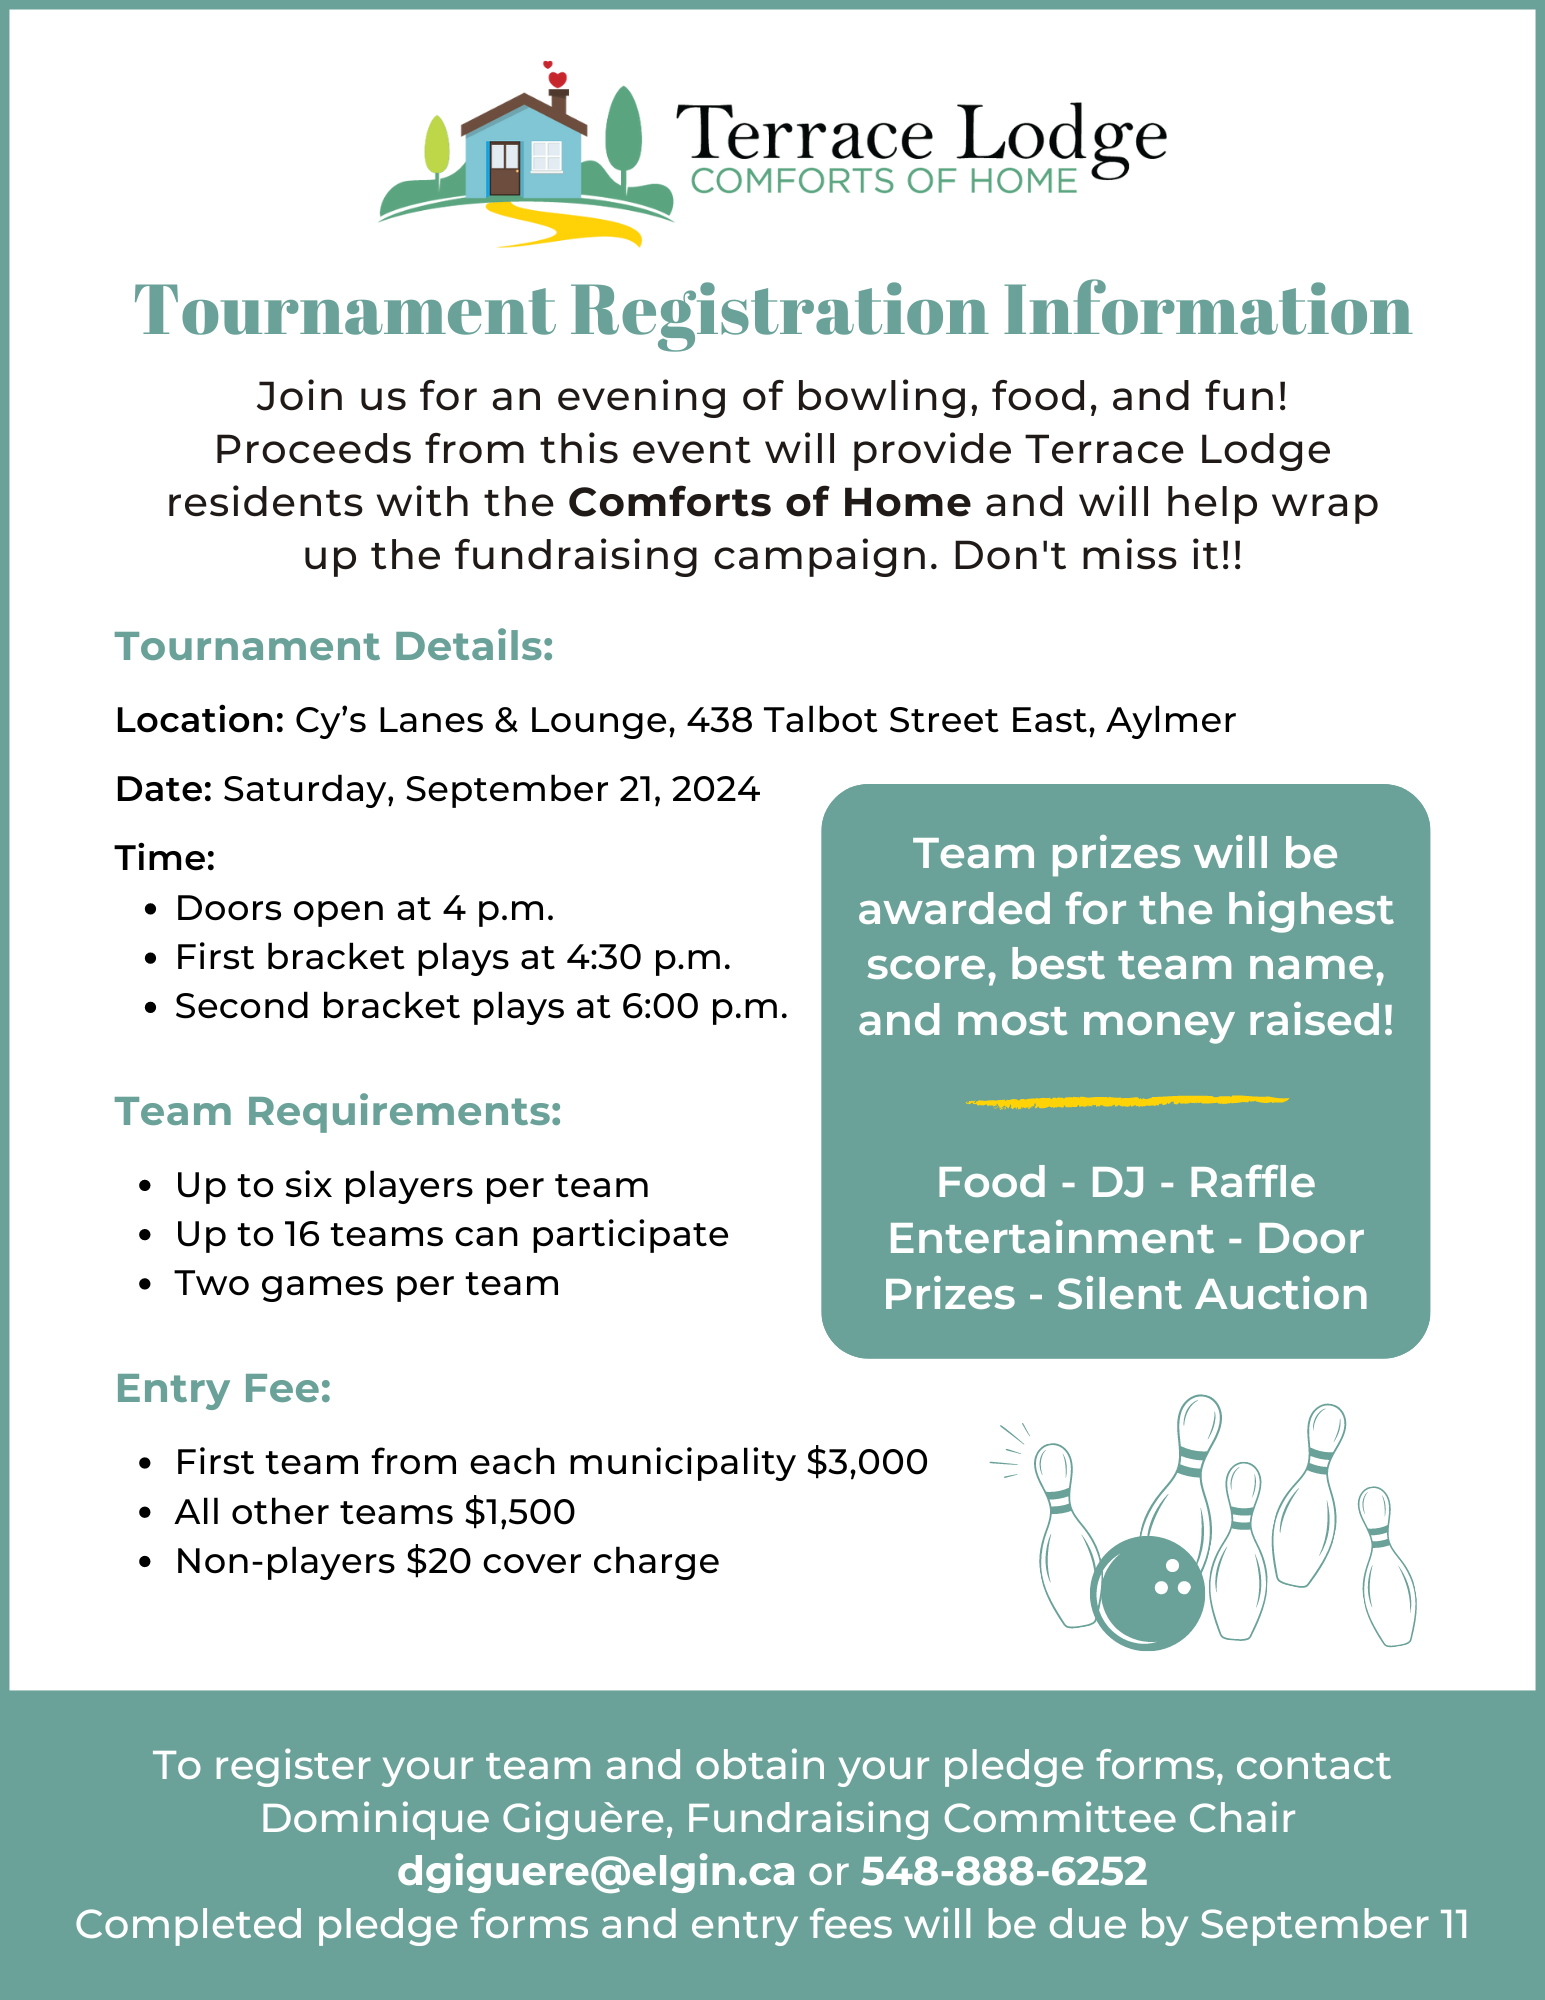 Terrace Lodge Bowling Tournament and Fundraiser - Registration Information